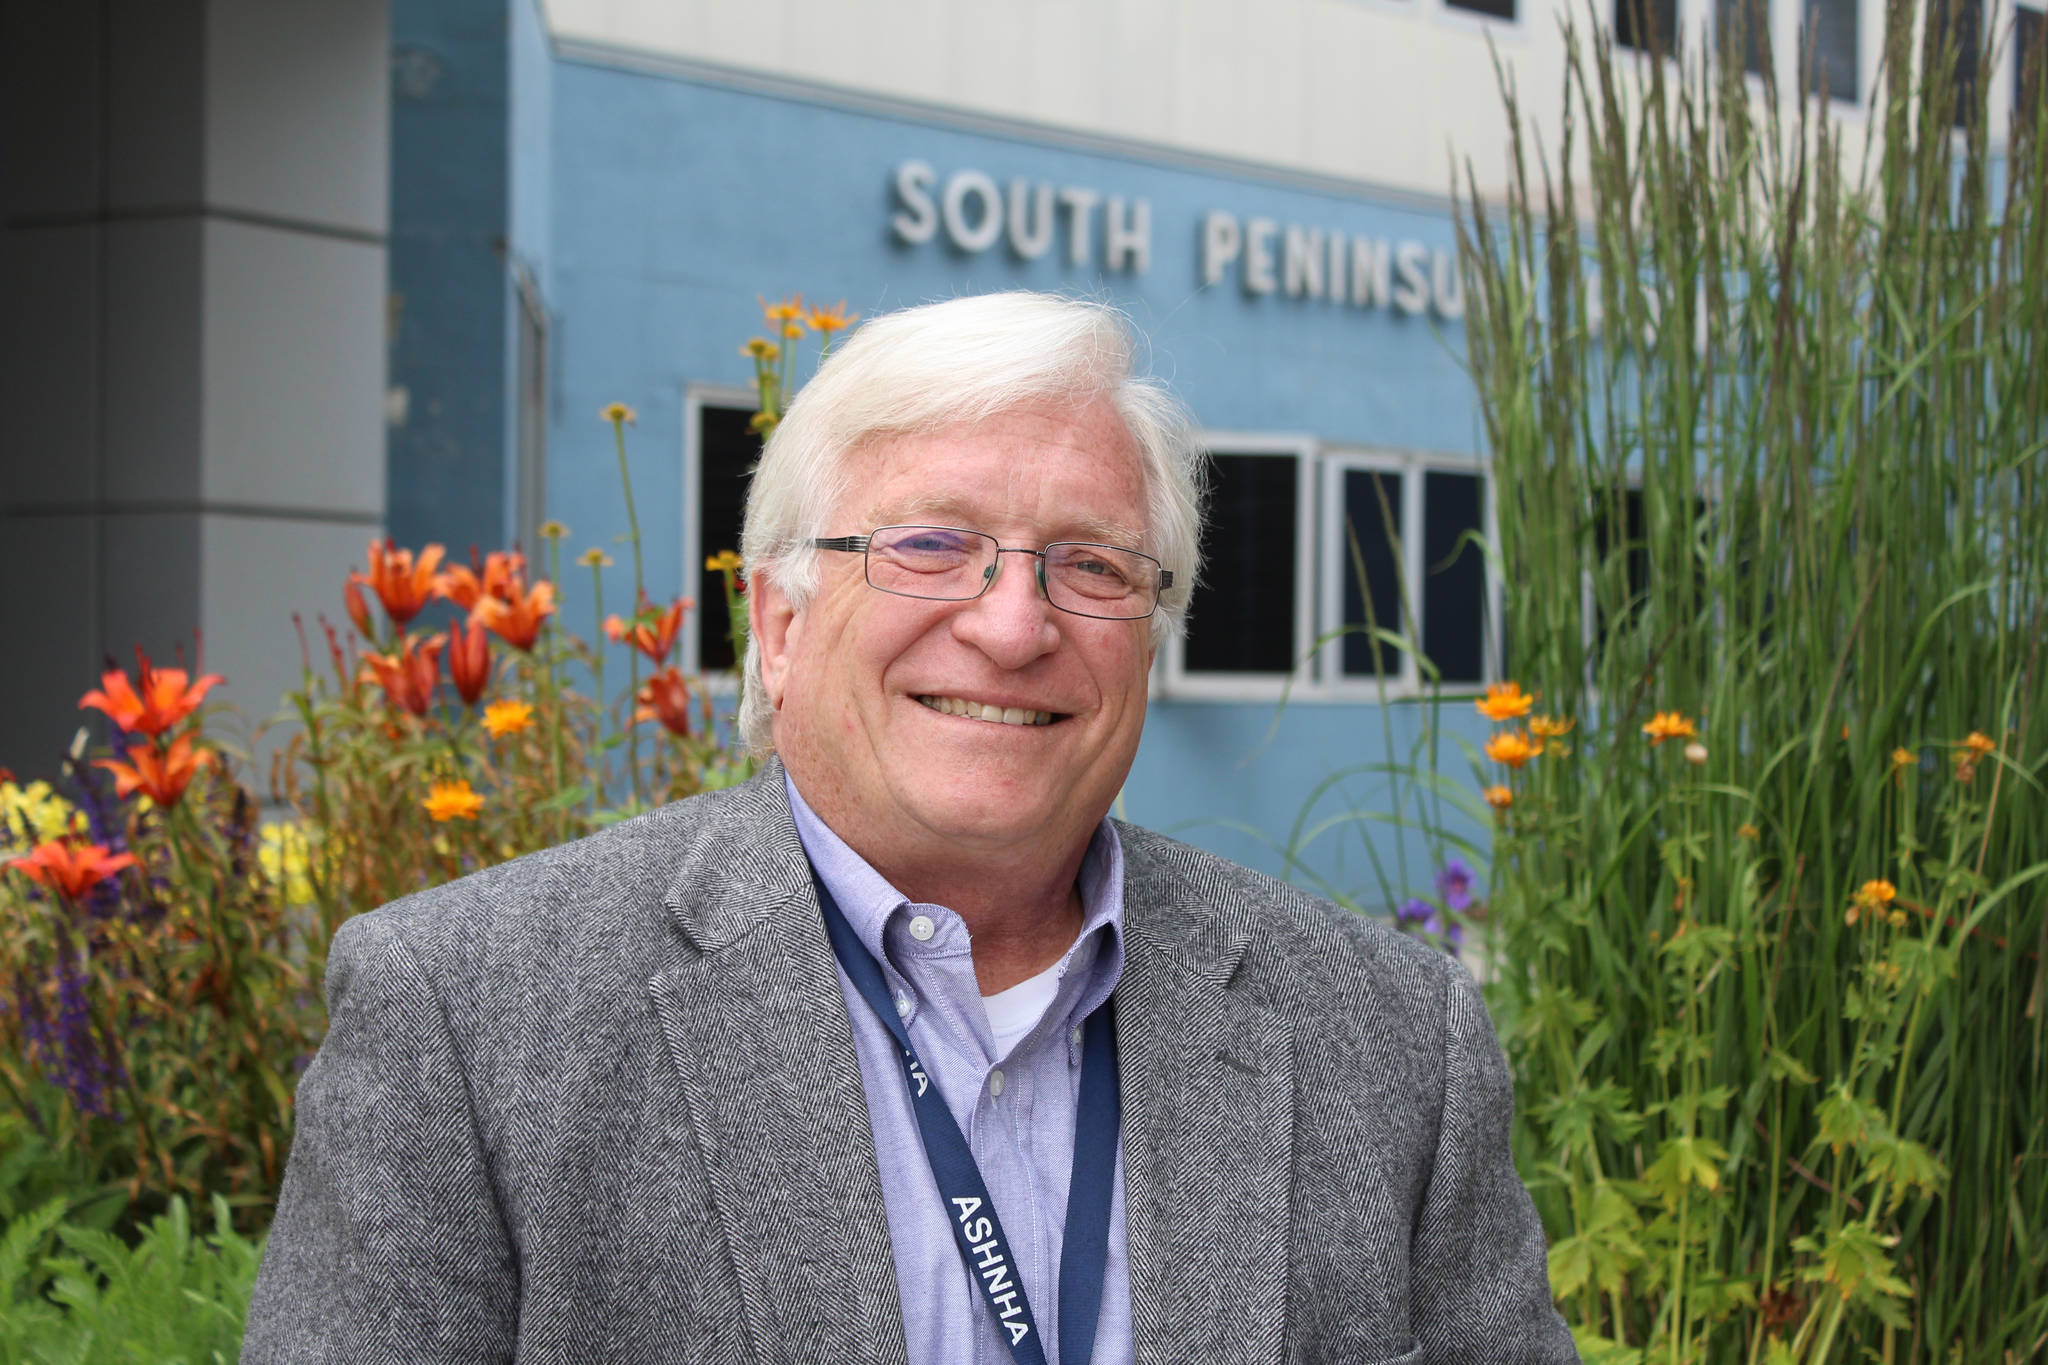 South Peninsula Hospital CEO Robert Letson poses for a photo in front of the hospital’s Bartlett Street entrance on July 9, 2016, for SPH’s 60th Anniversary Party. (Homer News file photo, Anna Frost)